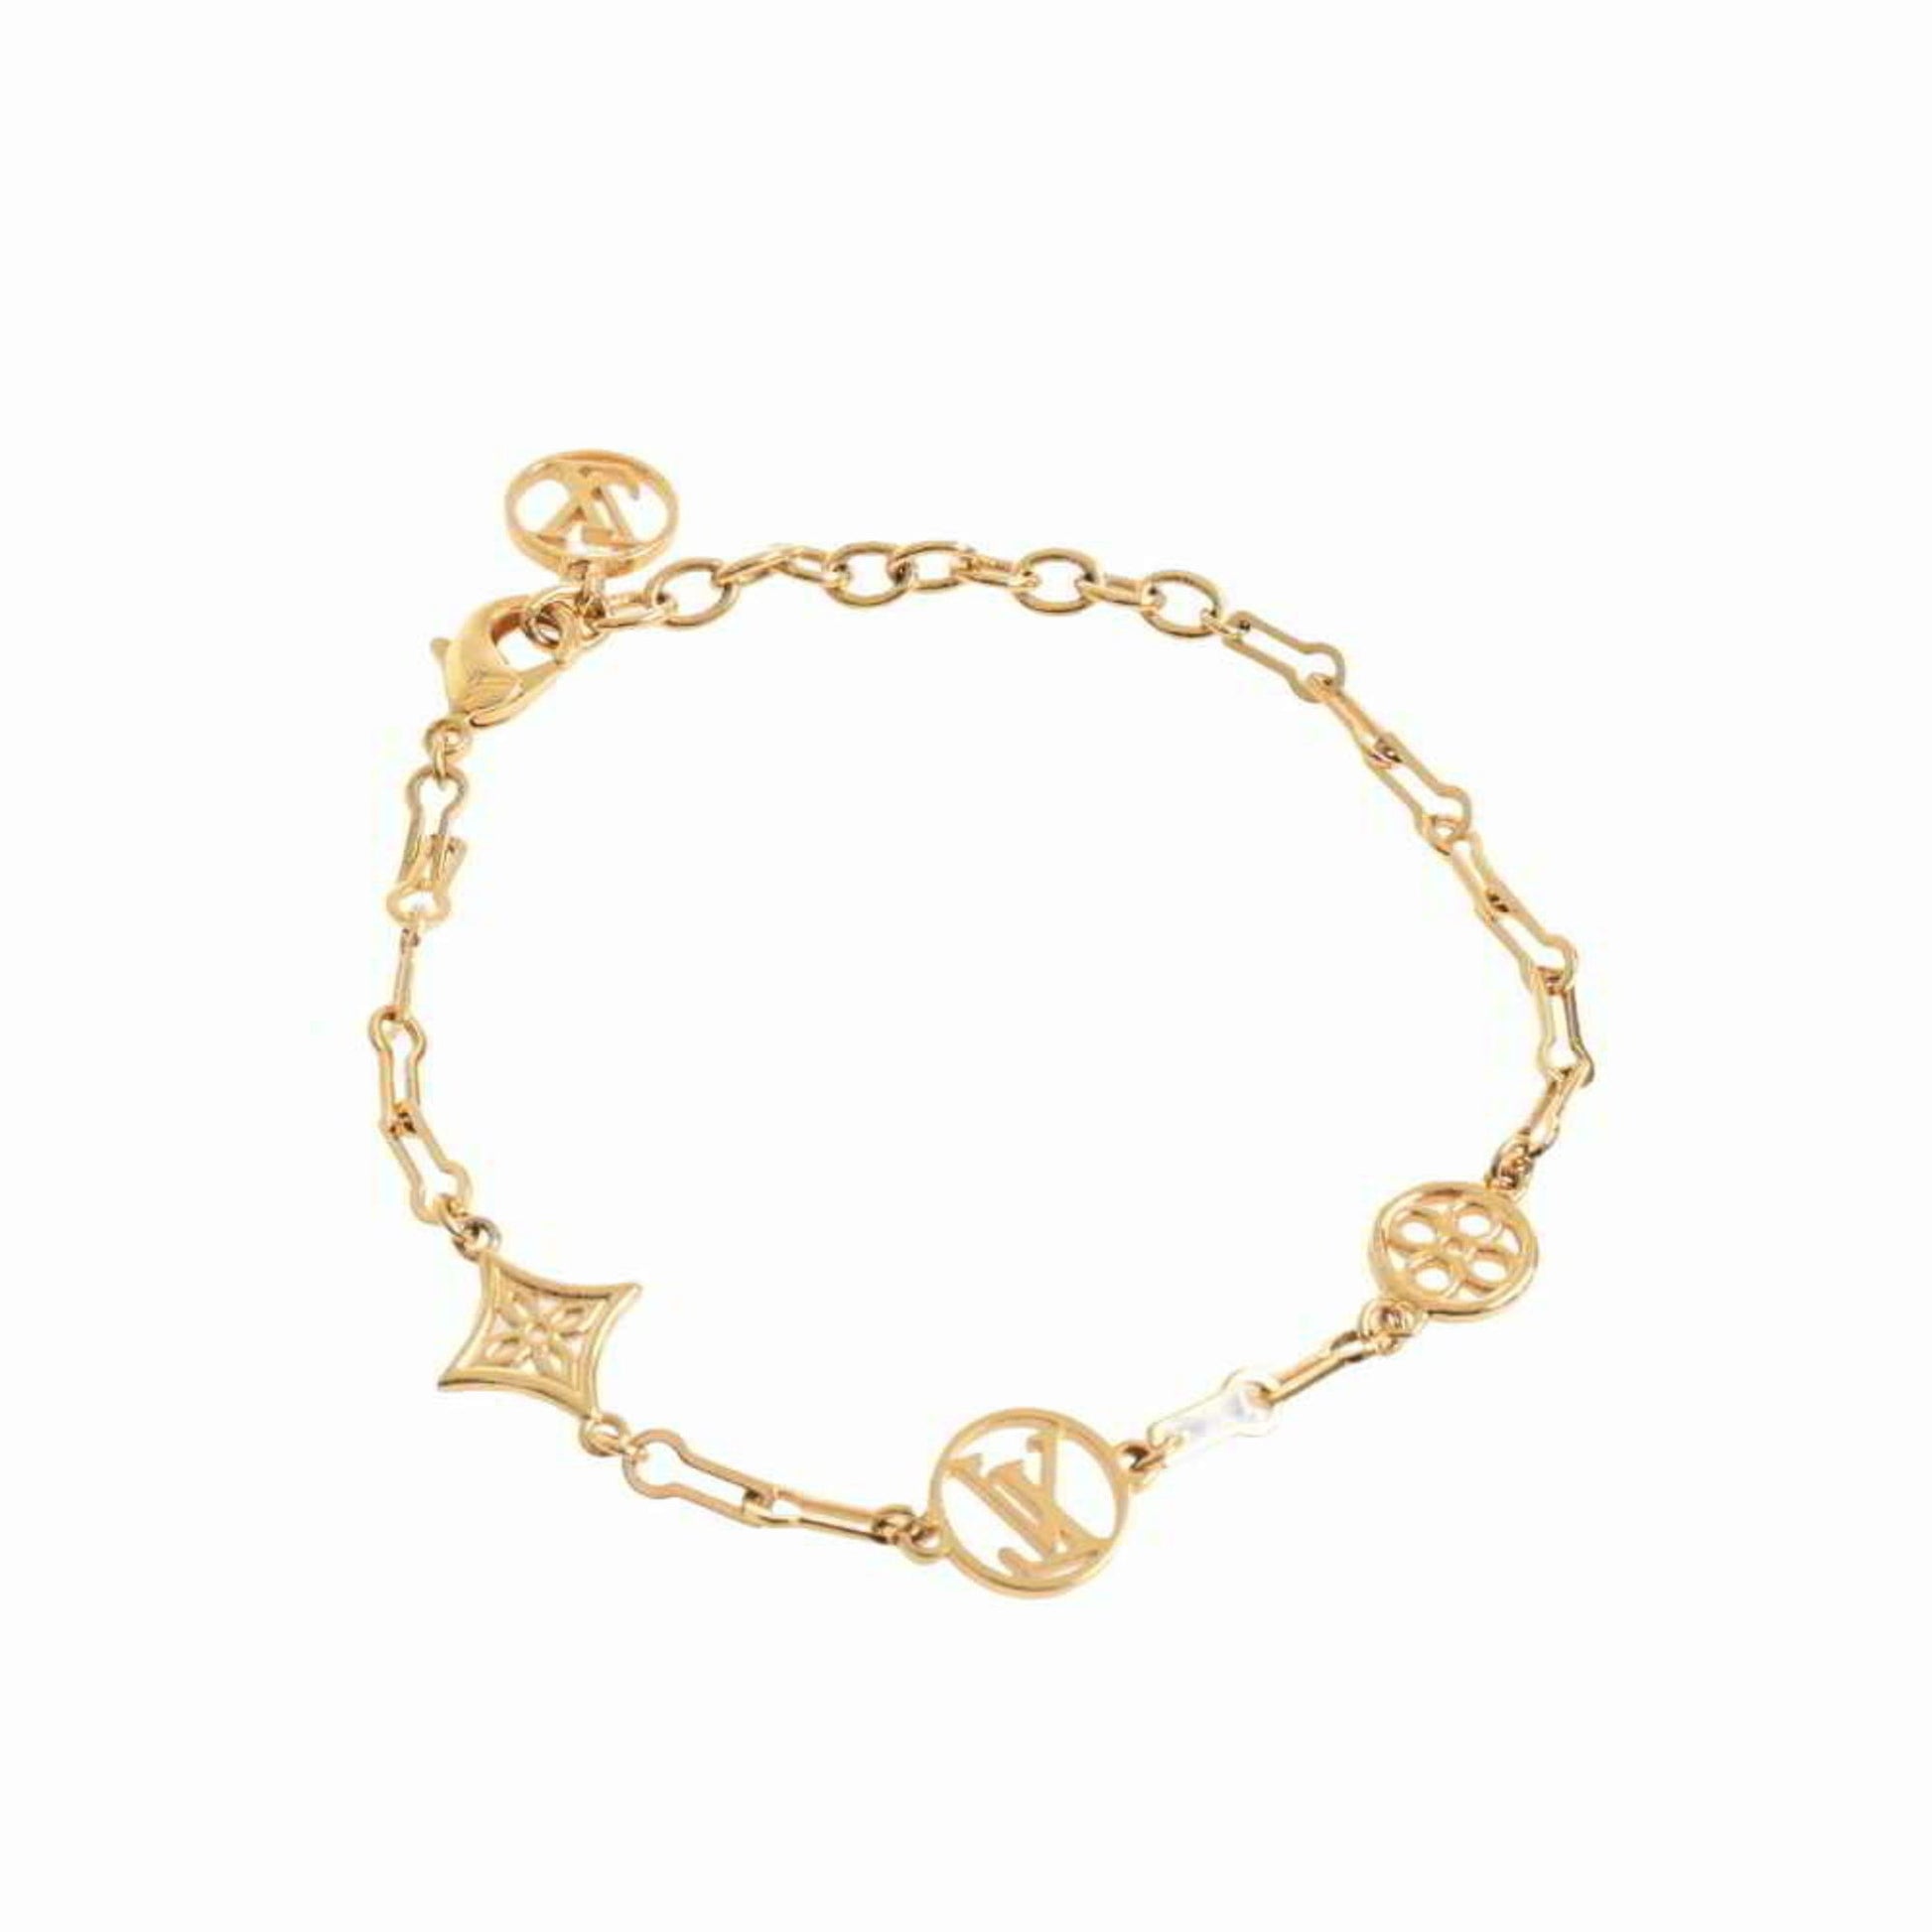 100% Auth. Louis Vuitton Forever Young bracelet for women